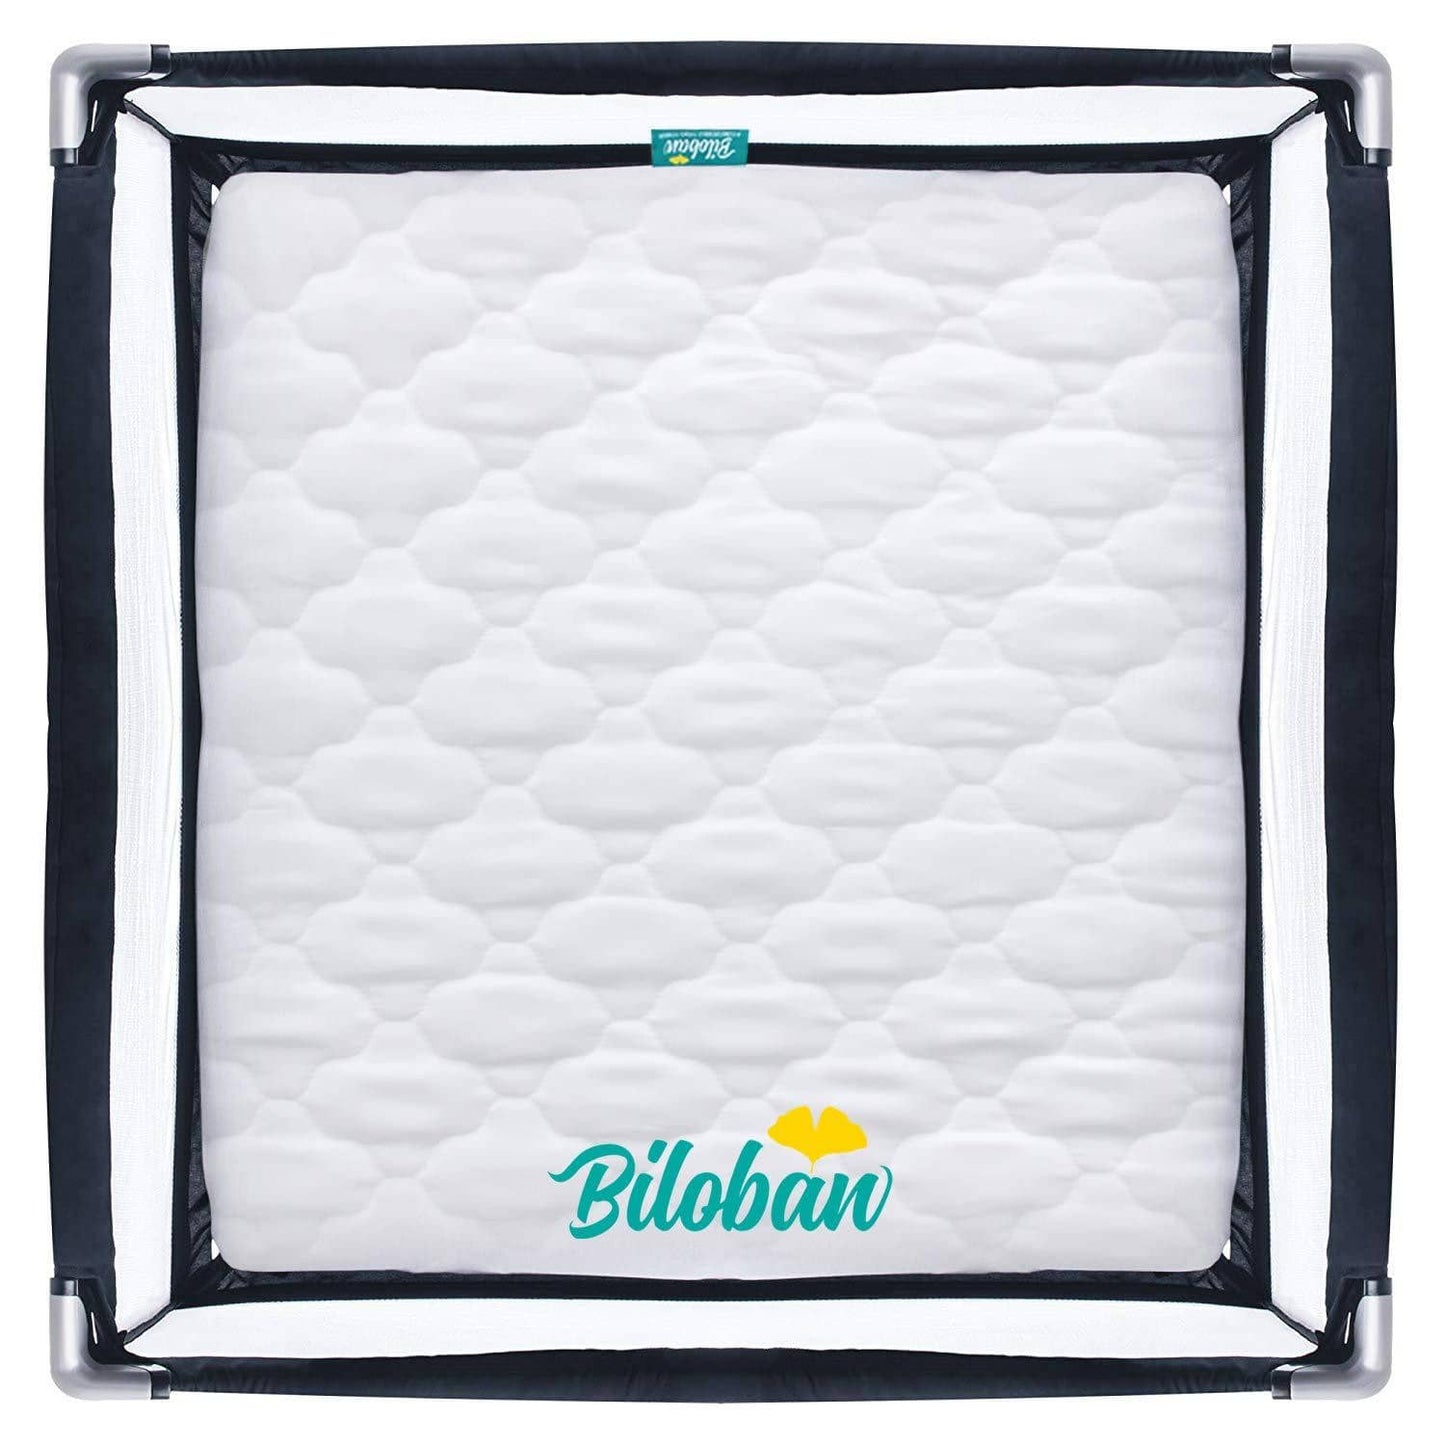 Square Pack N Play Mattress Cover (for Graco Pack 'n Play TotBloc Playpen, 36'' x 36'') - Biloban Online Store